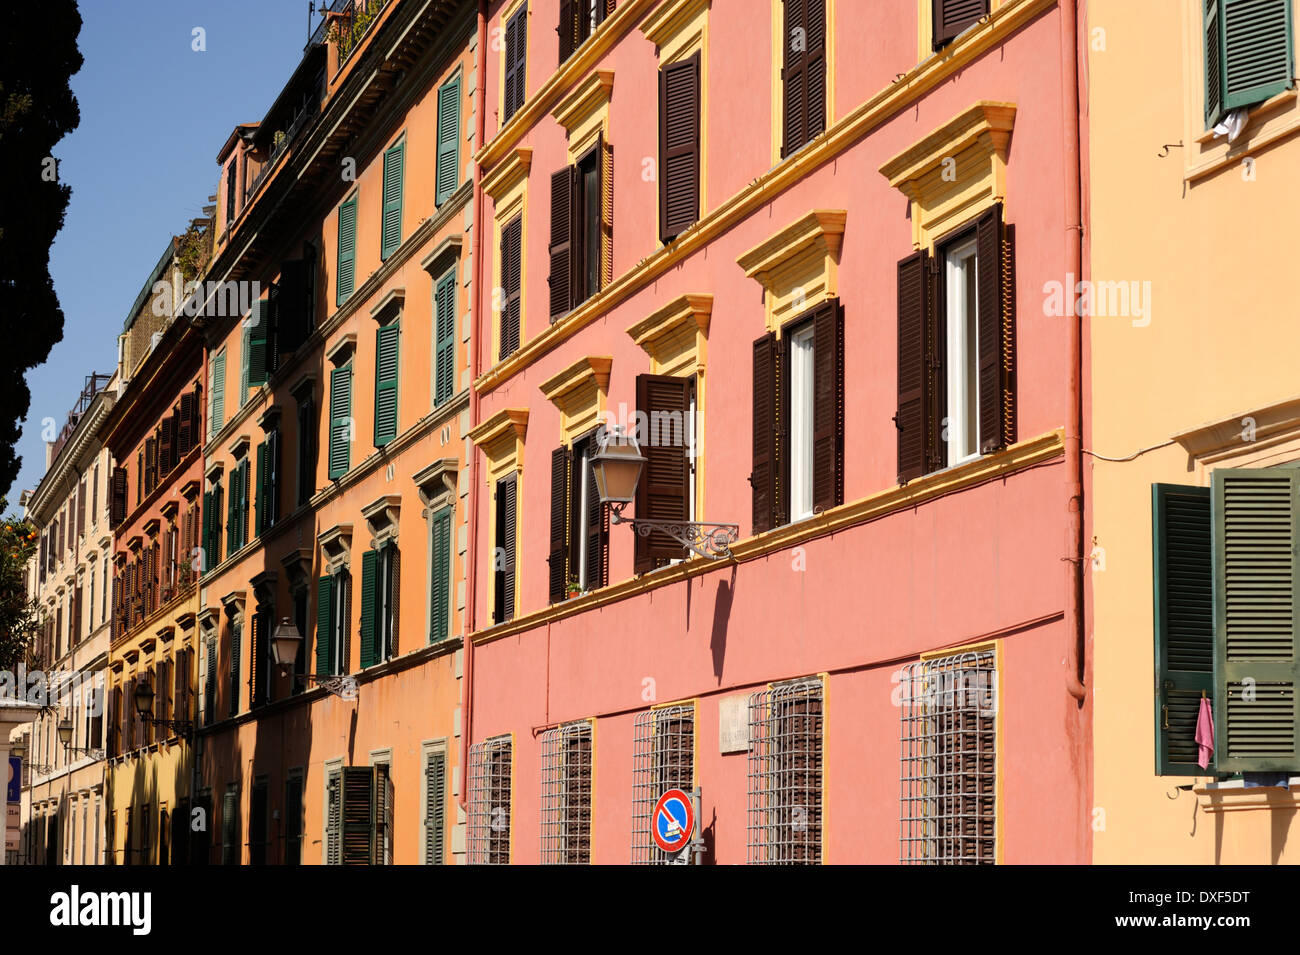 Italy, Rome, colourful houses Stock Photo